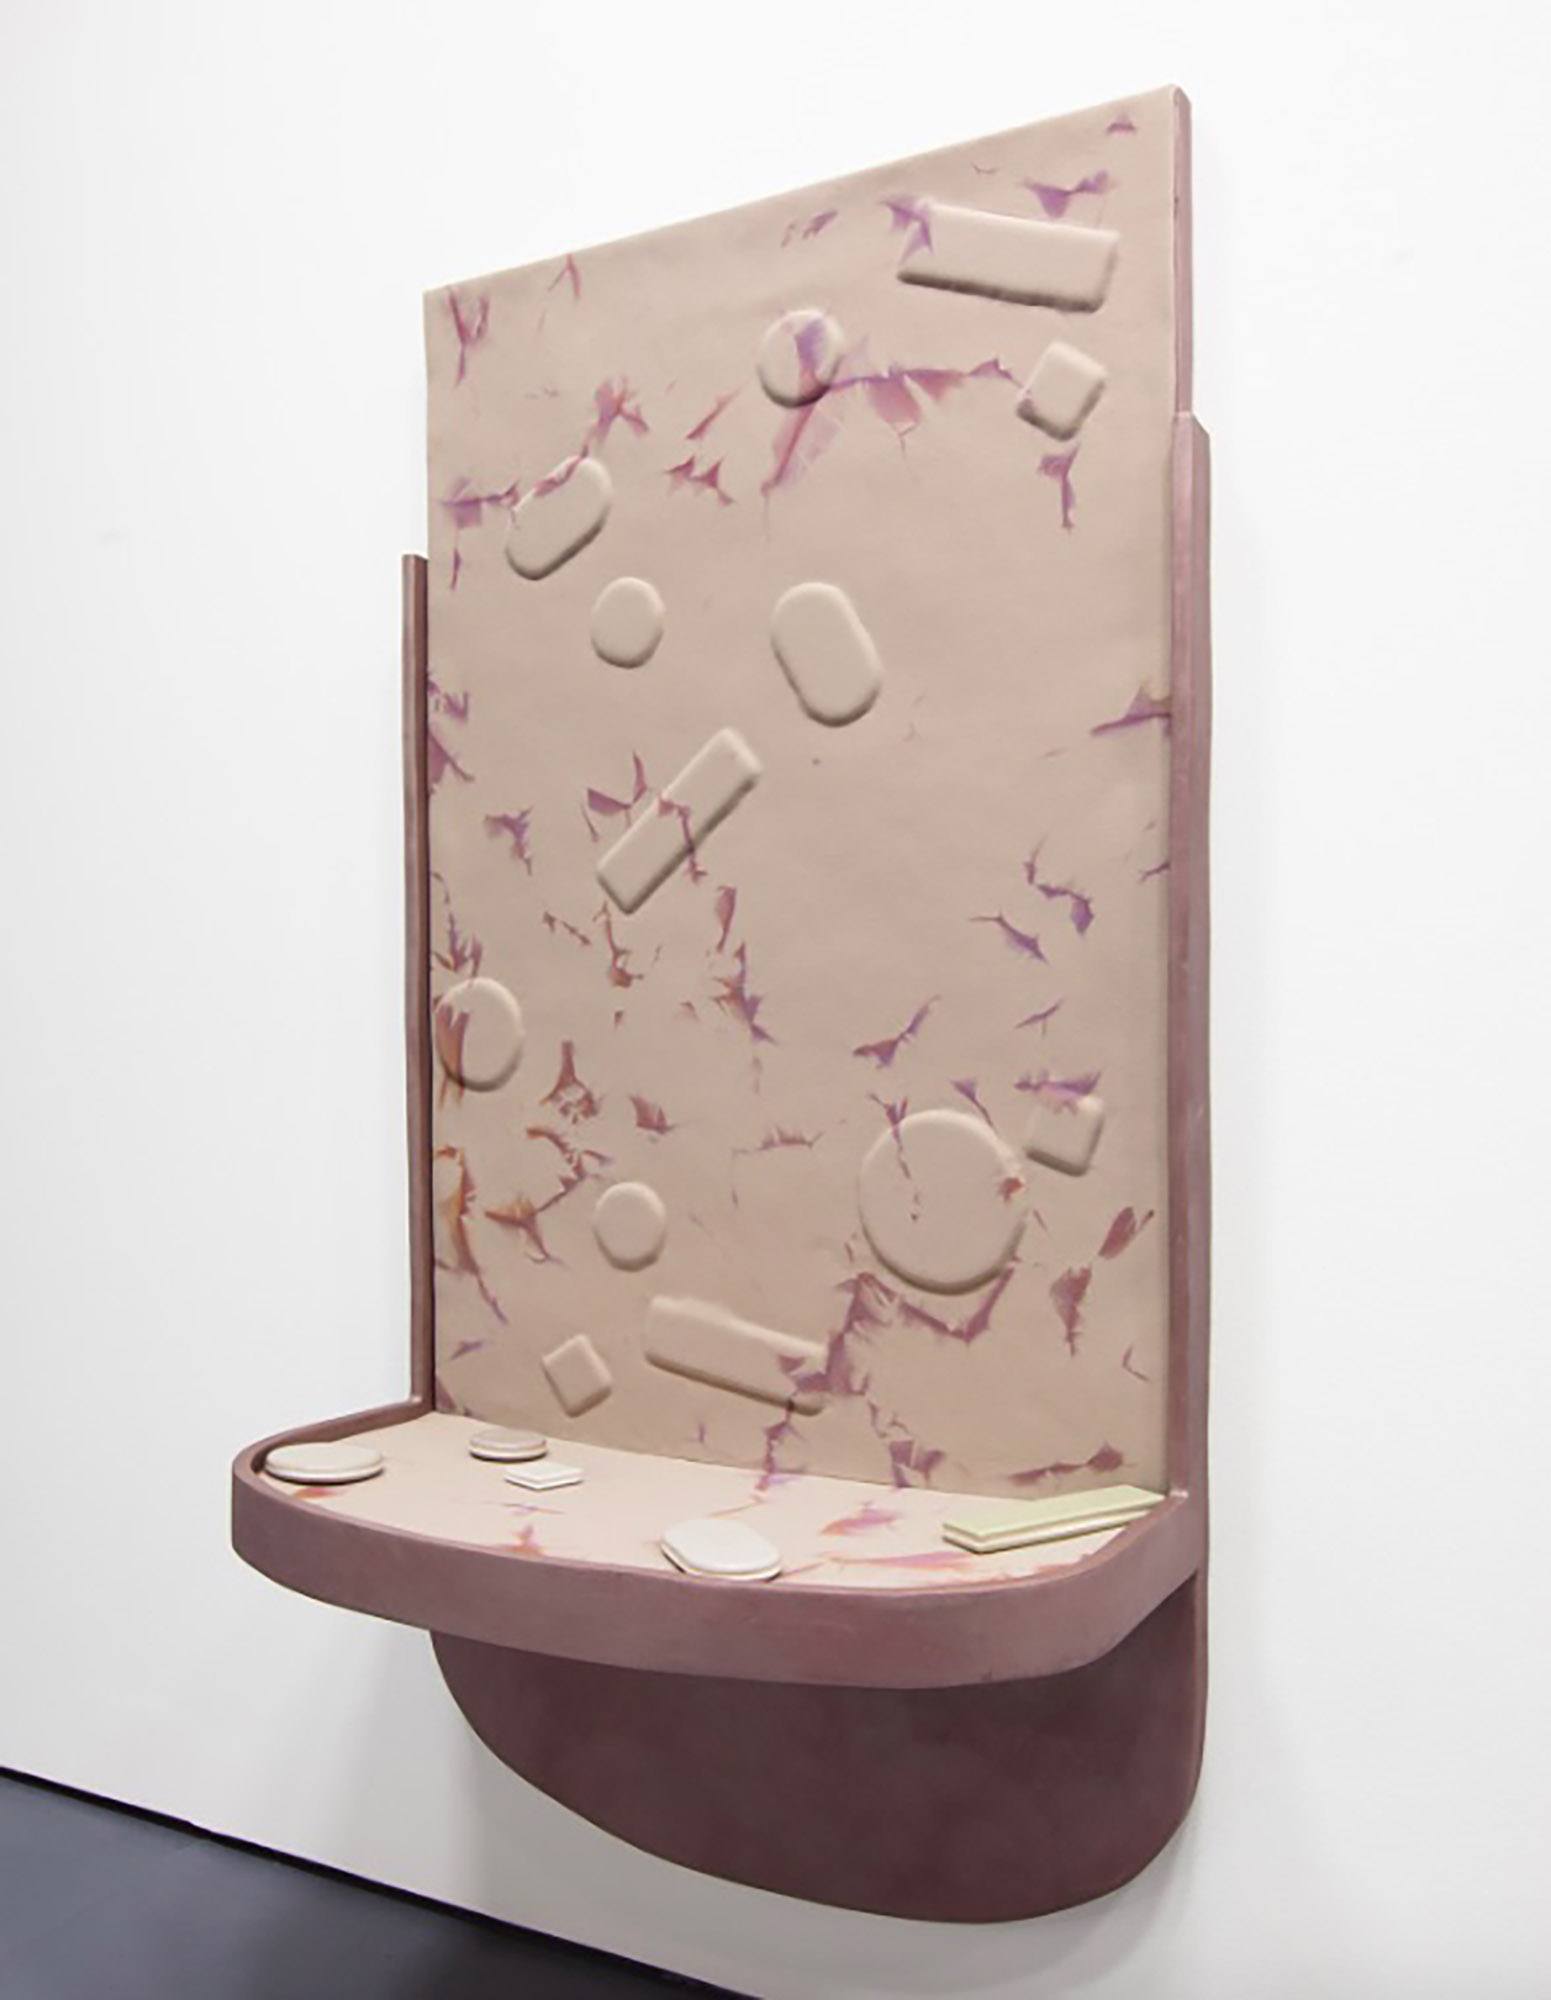 A mauve and light pink slab of clay molded into a shelf with molded shapes on its surface